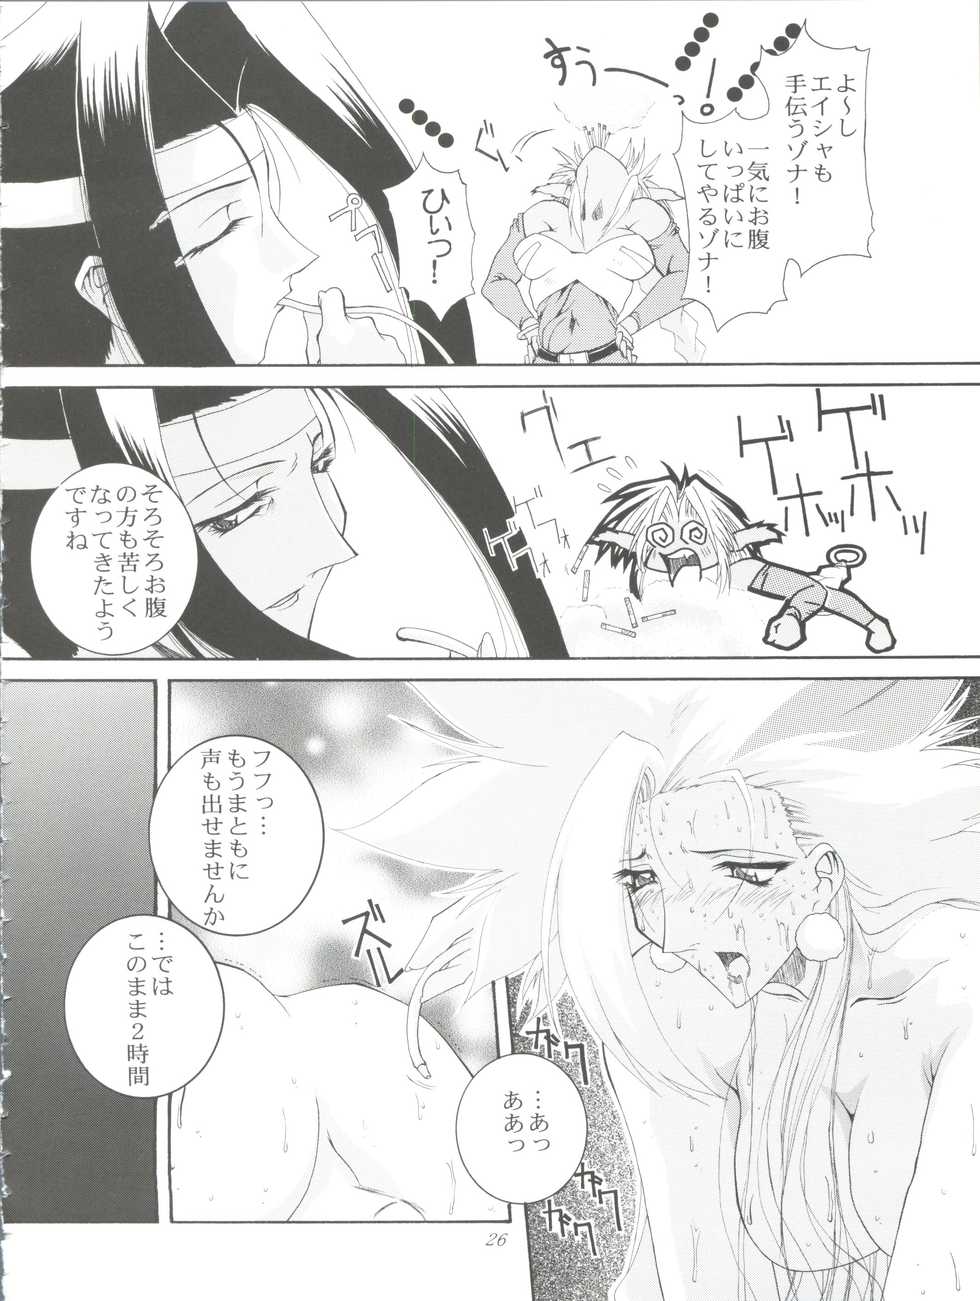 (SC4) [F.A (Honoutsukai)] Habat coy 22 - Angel Star (Angel Links, Outlaw Star) - Page 26